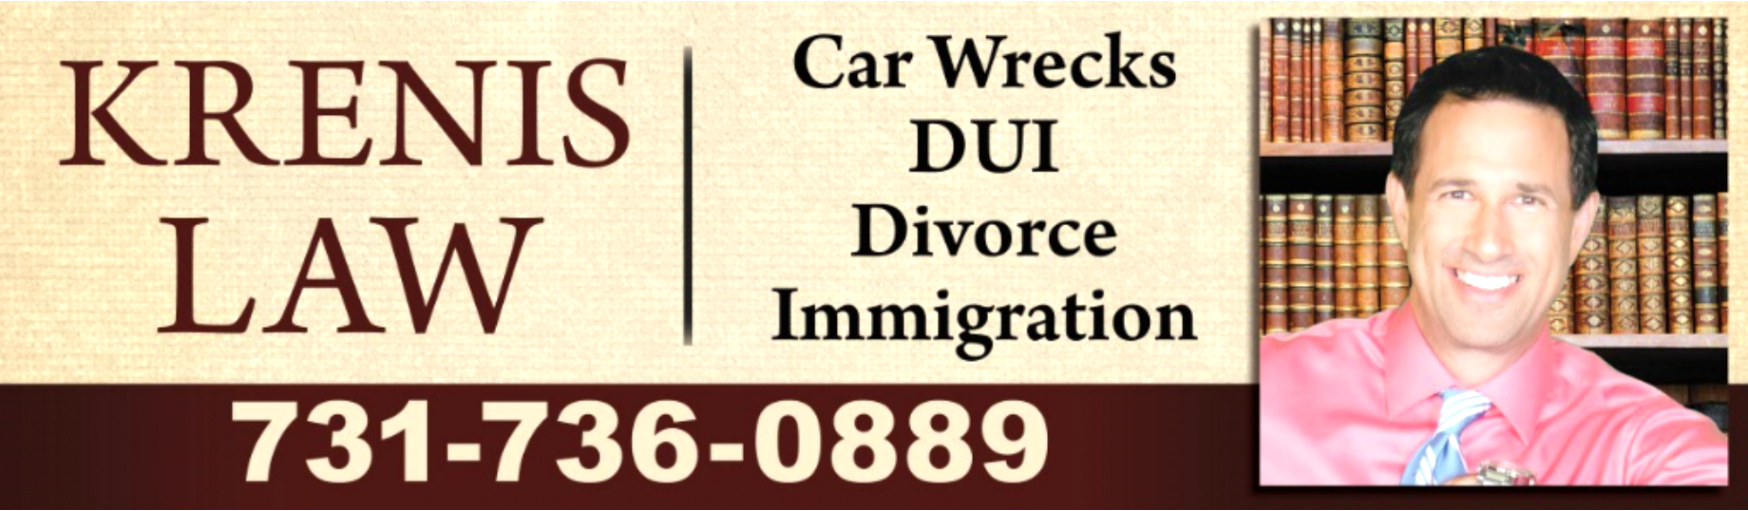 Personal Injury Lawyer Jackson Tn Dans Personal Injury Dui Immigration & Divorce Lawyer